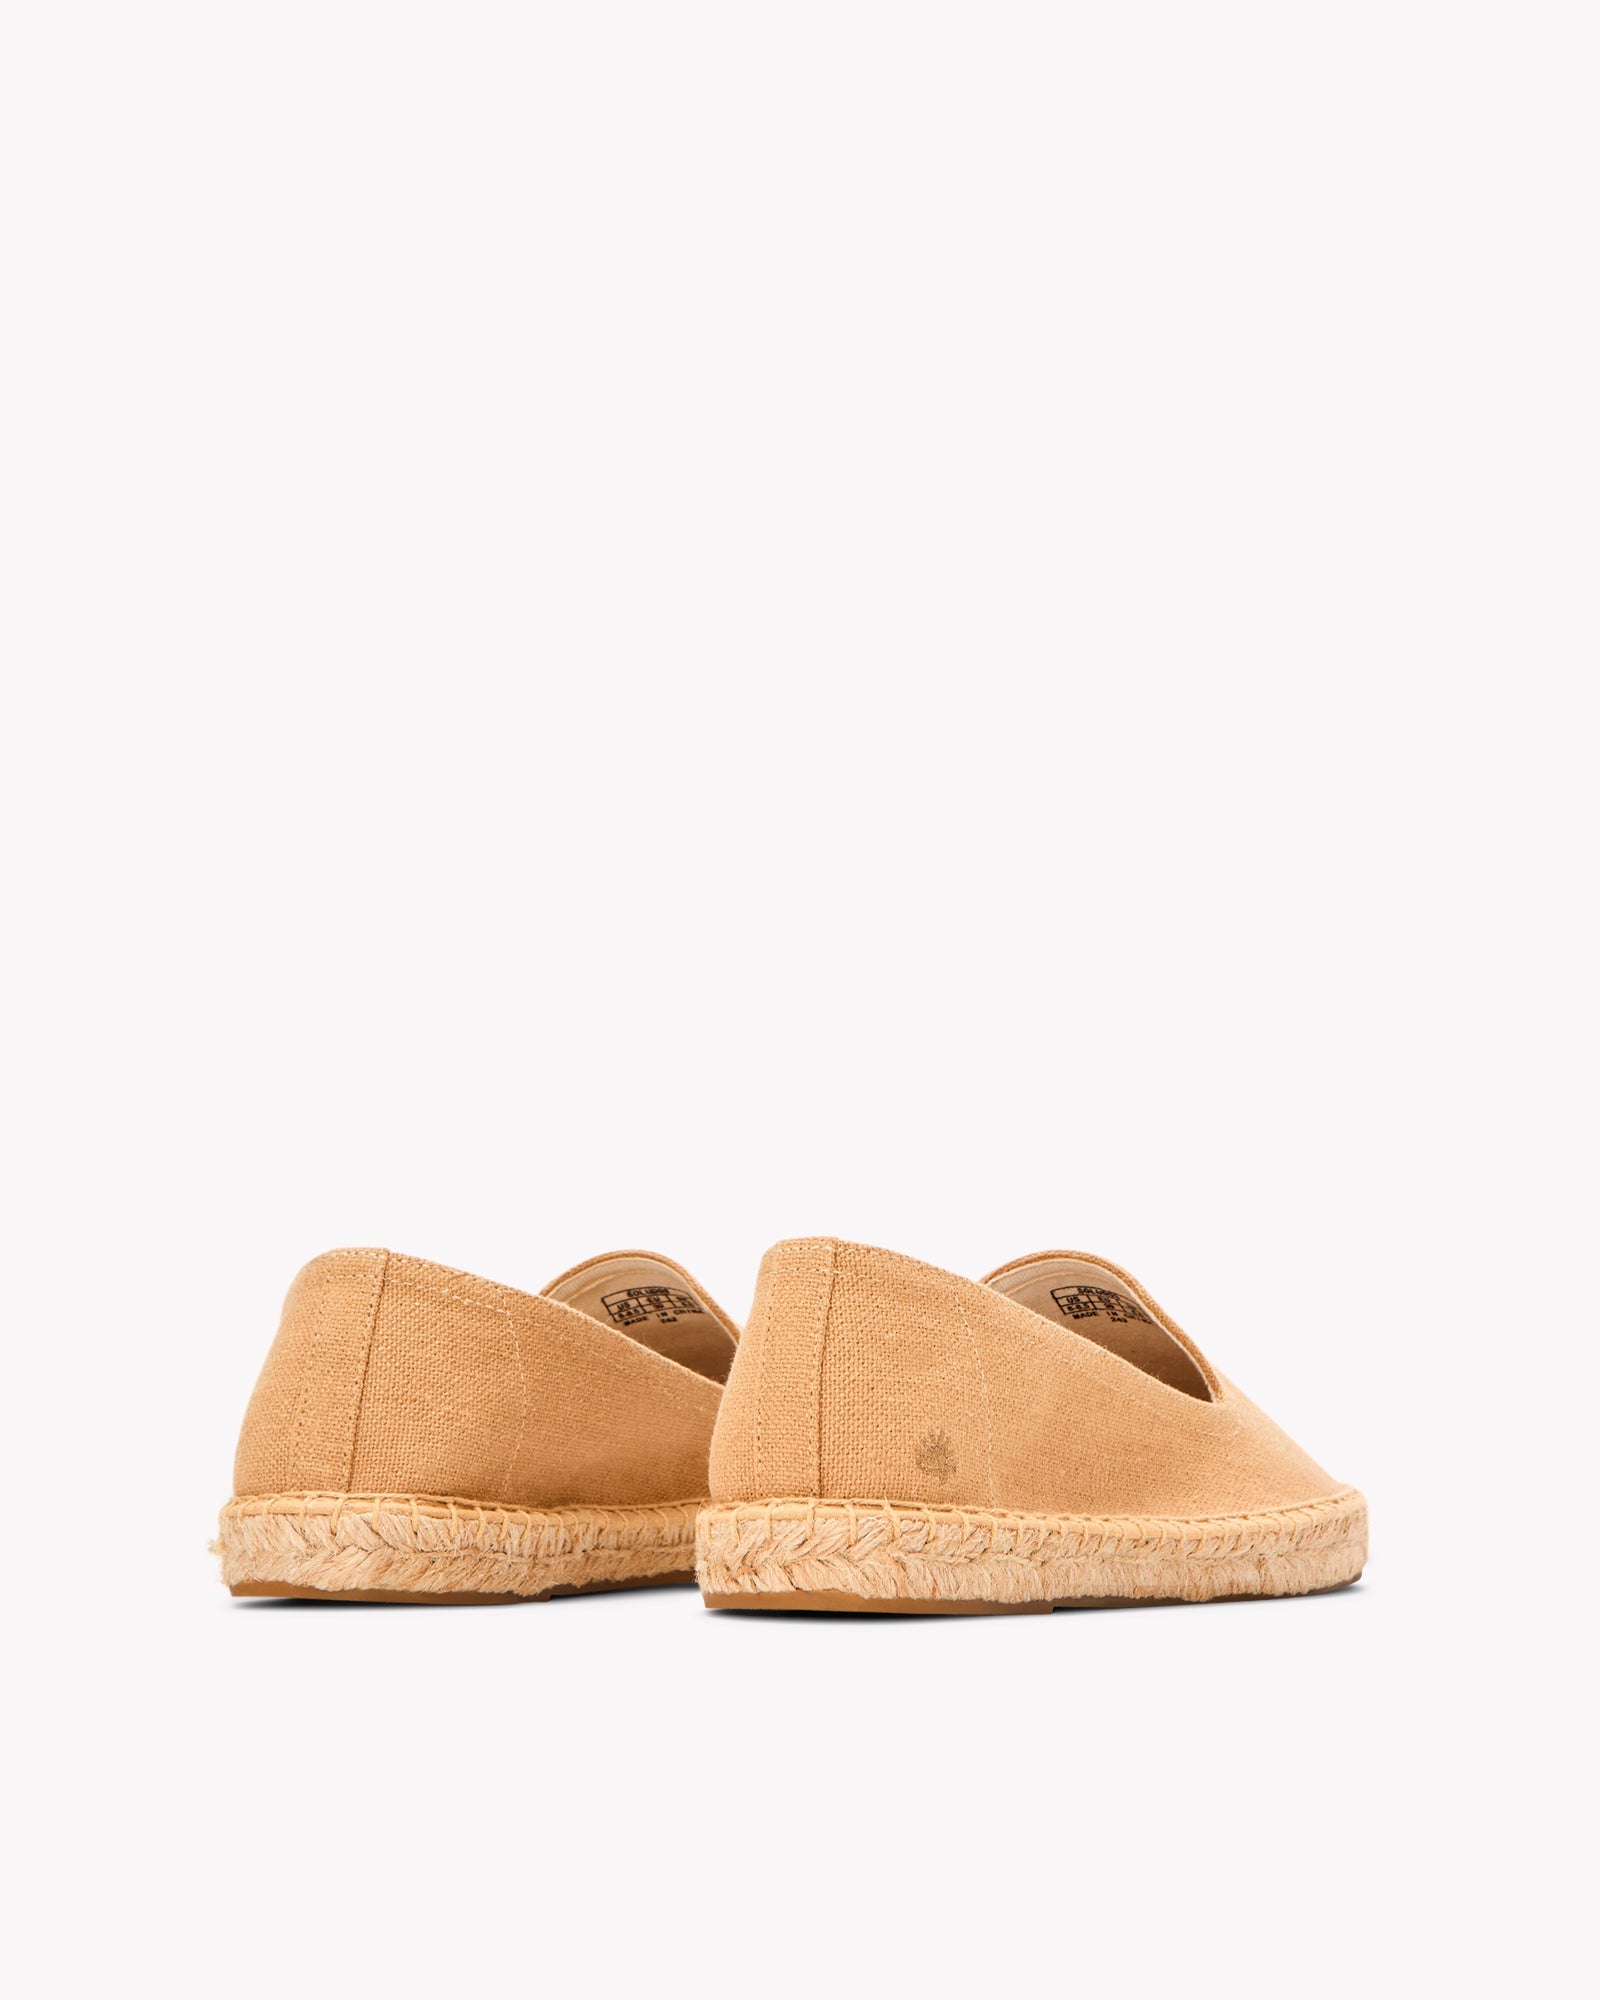 The Smoking Slipper - Core - Cafe Taupe - Women's